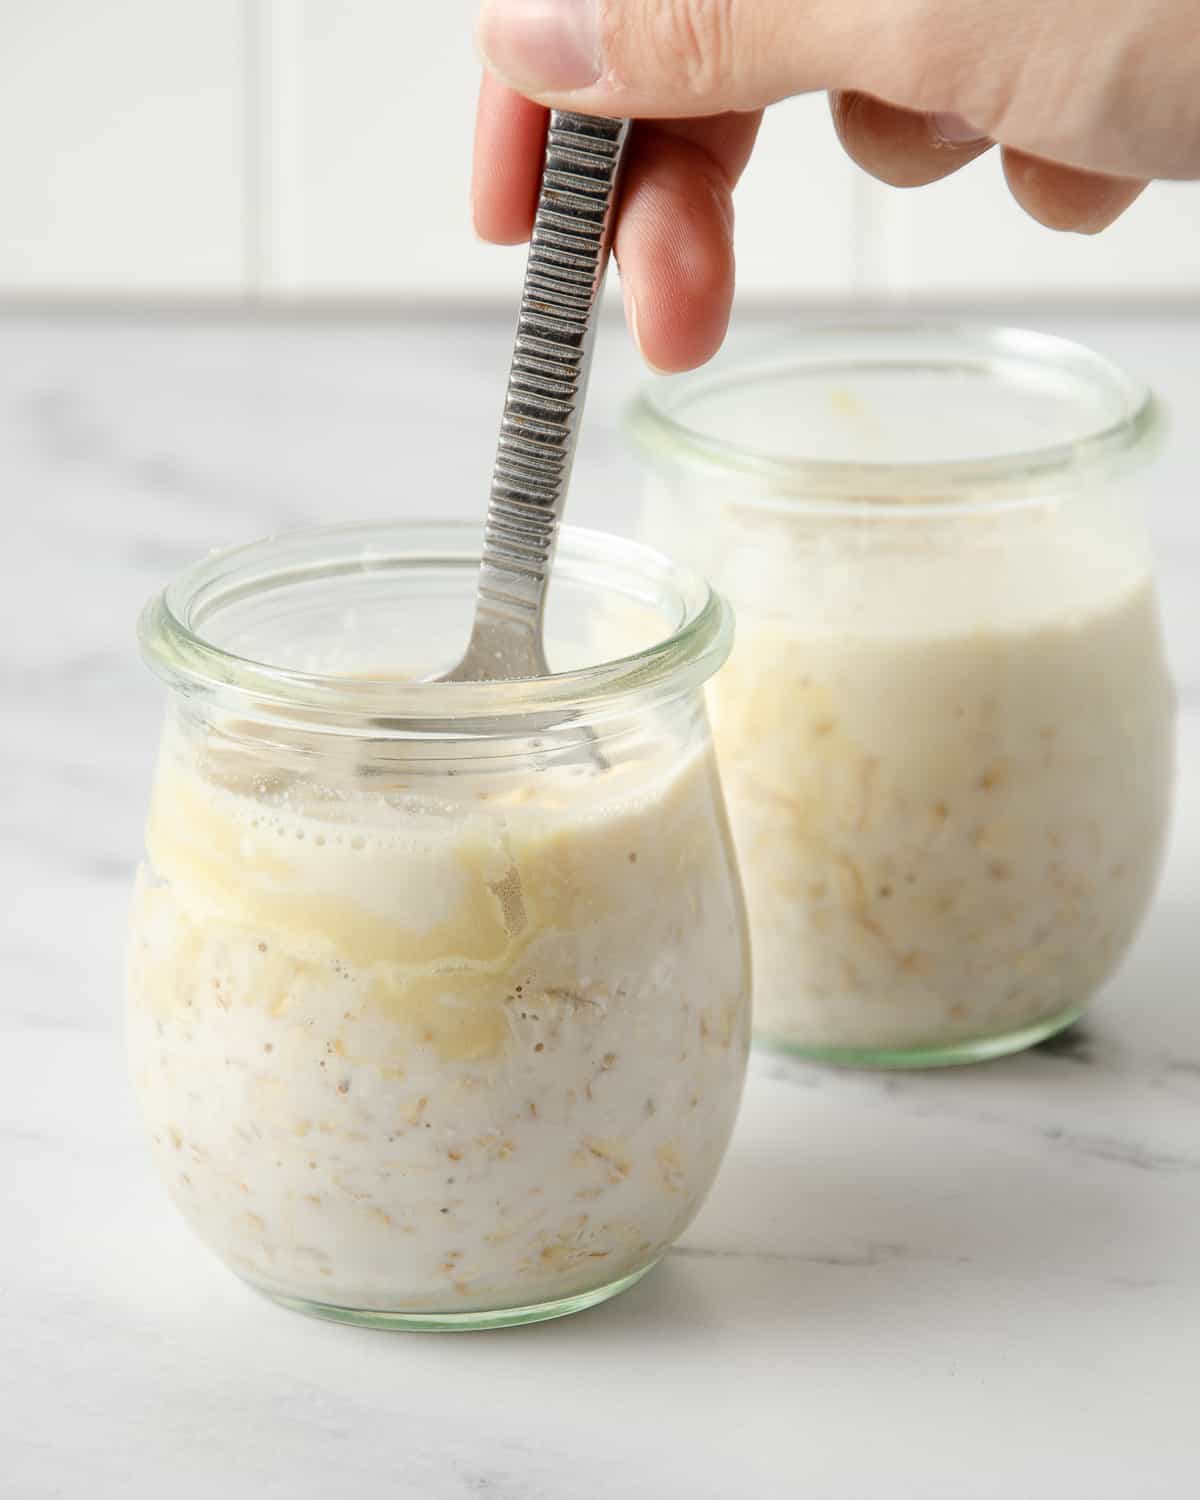 A spoon mixing the overnight protein oats.